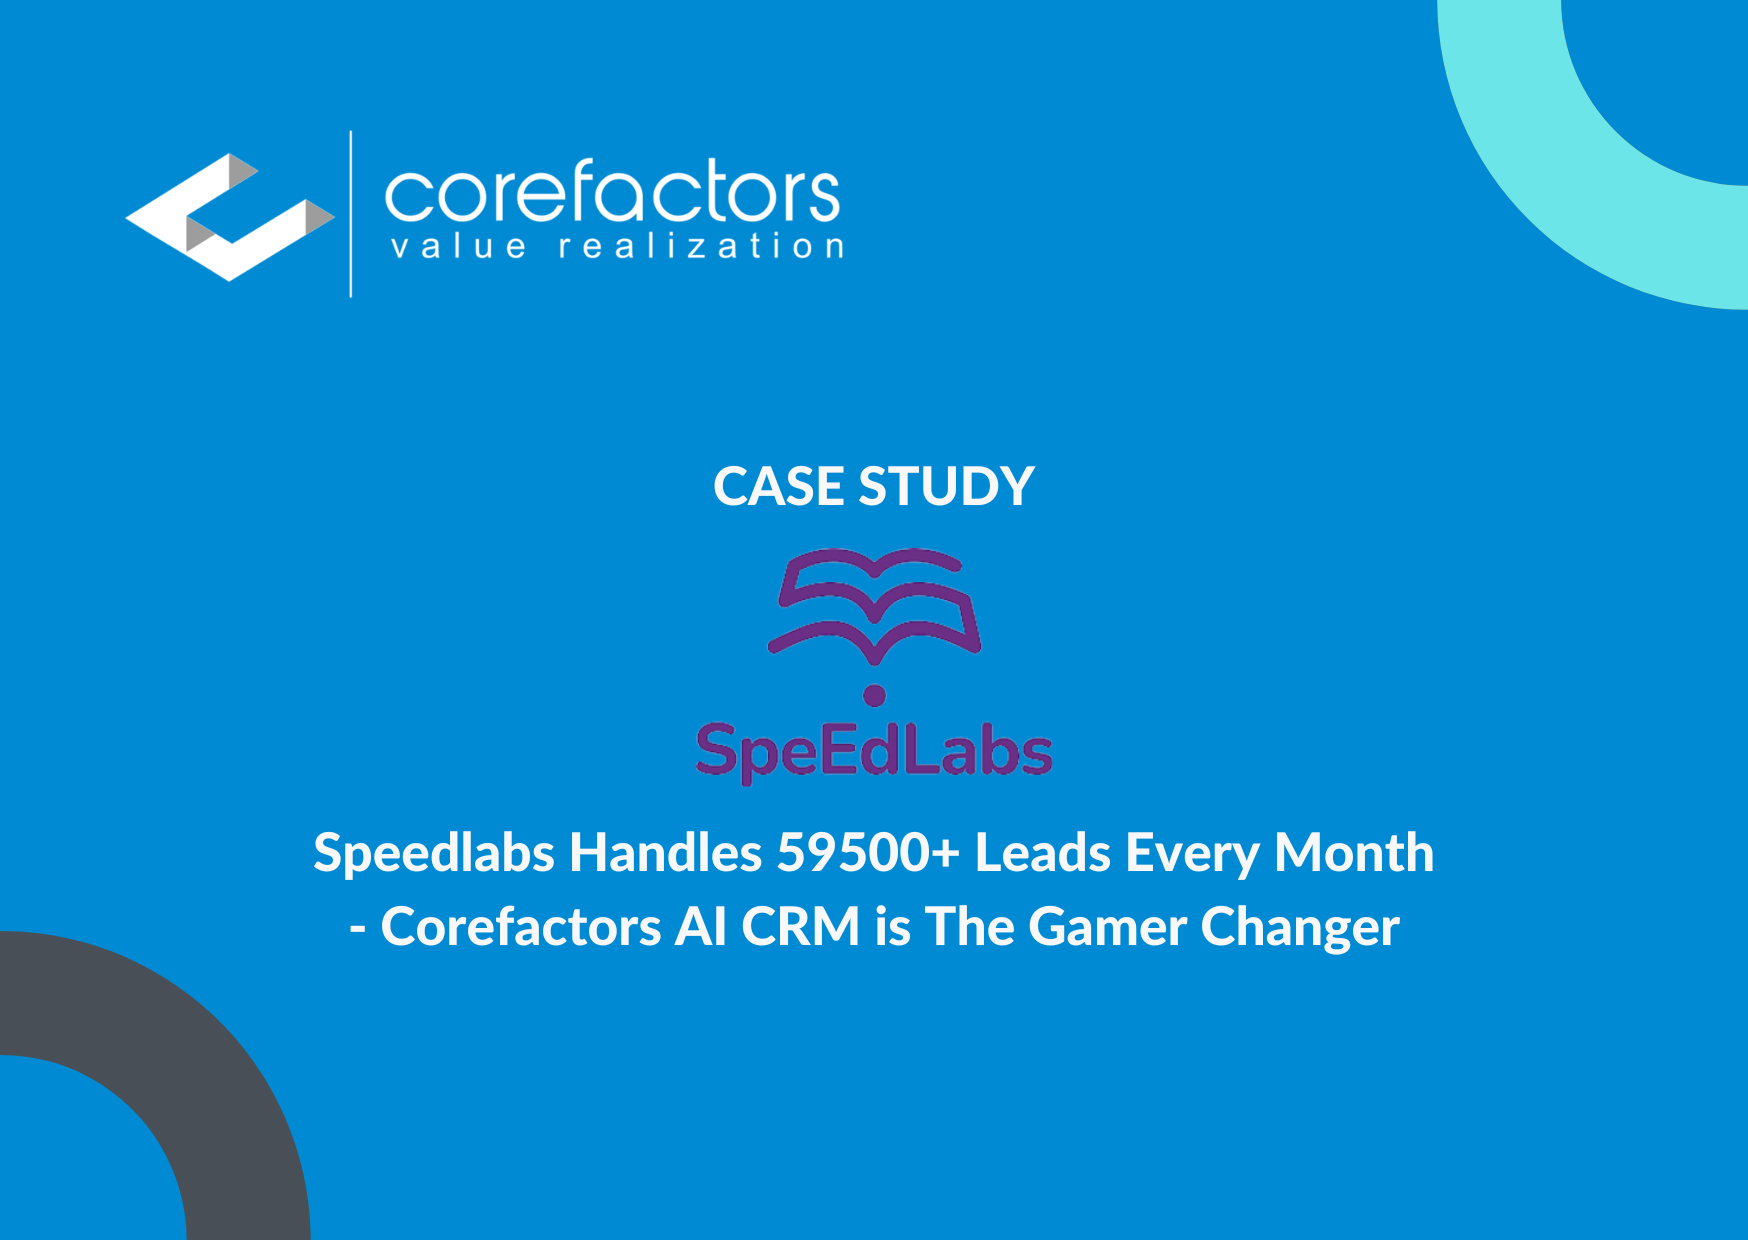 Speedlabs Handles 59500+ Leads Every Month - Corefactors AI CRM is The Gamer Changer